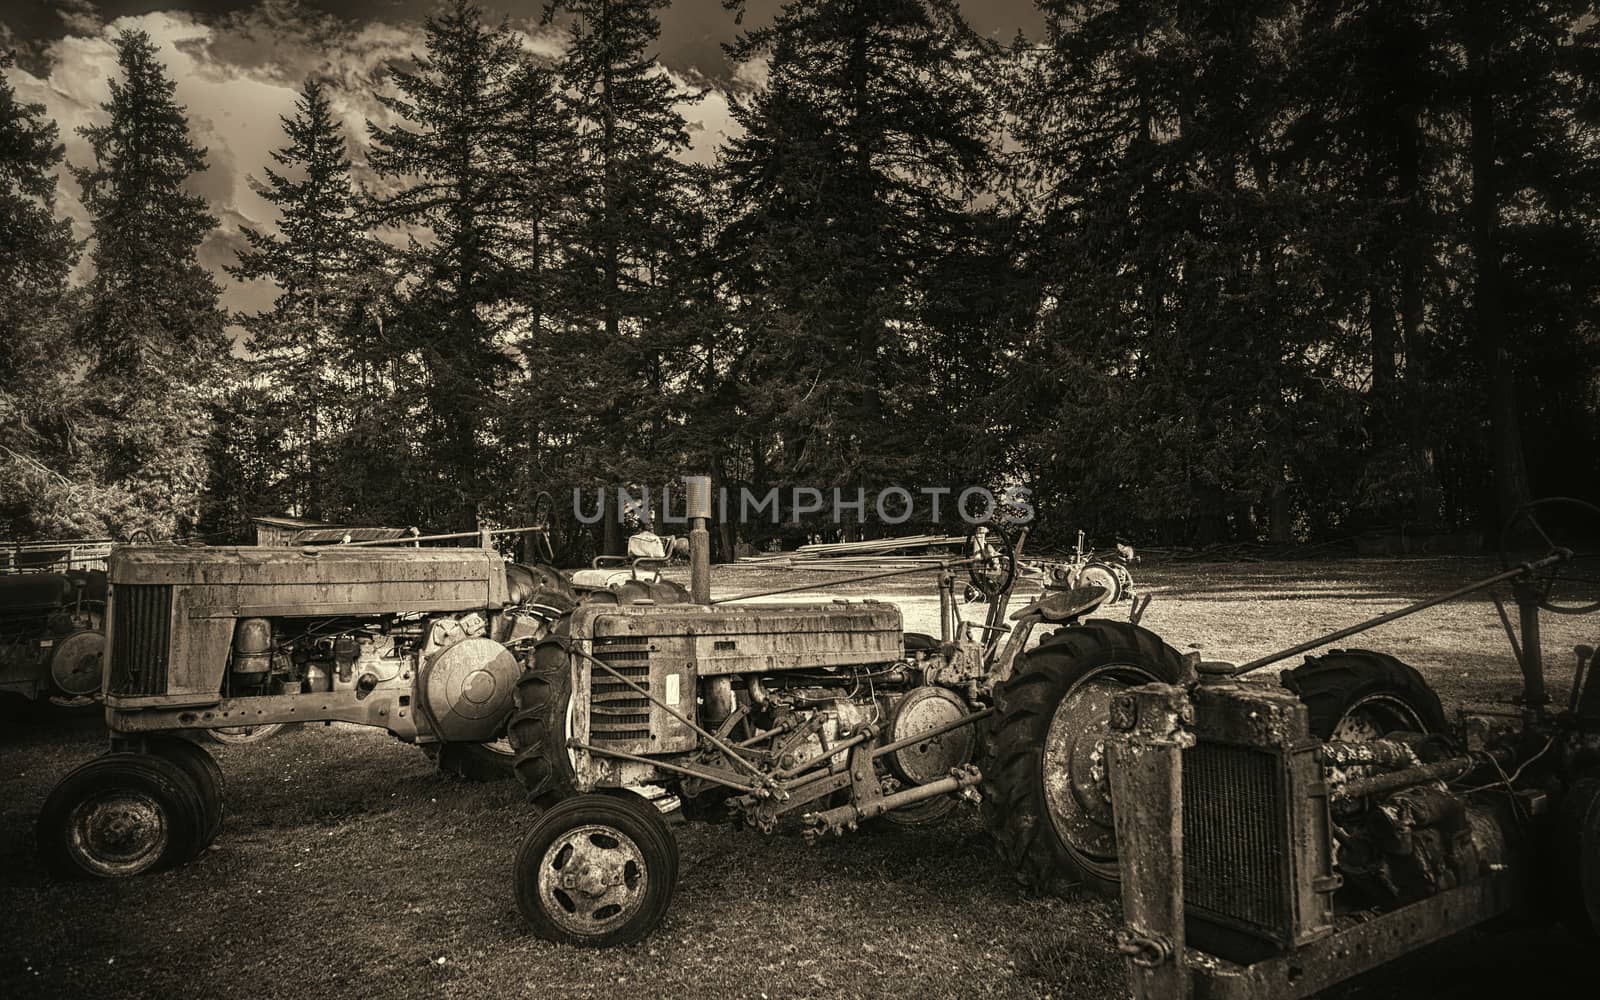 Antique Tractors in a Field, Black and White Image, USA